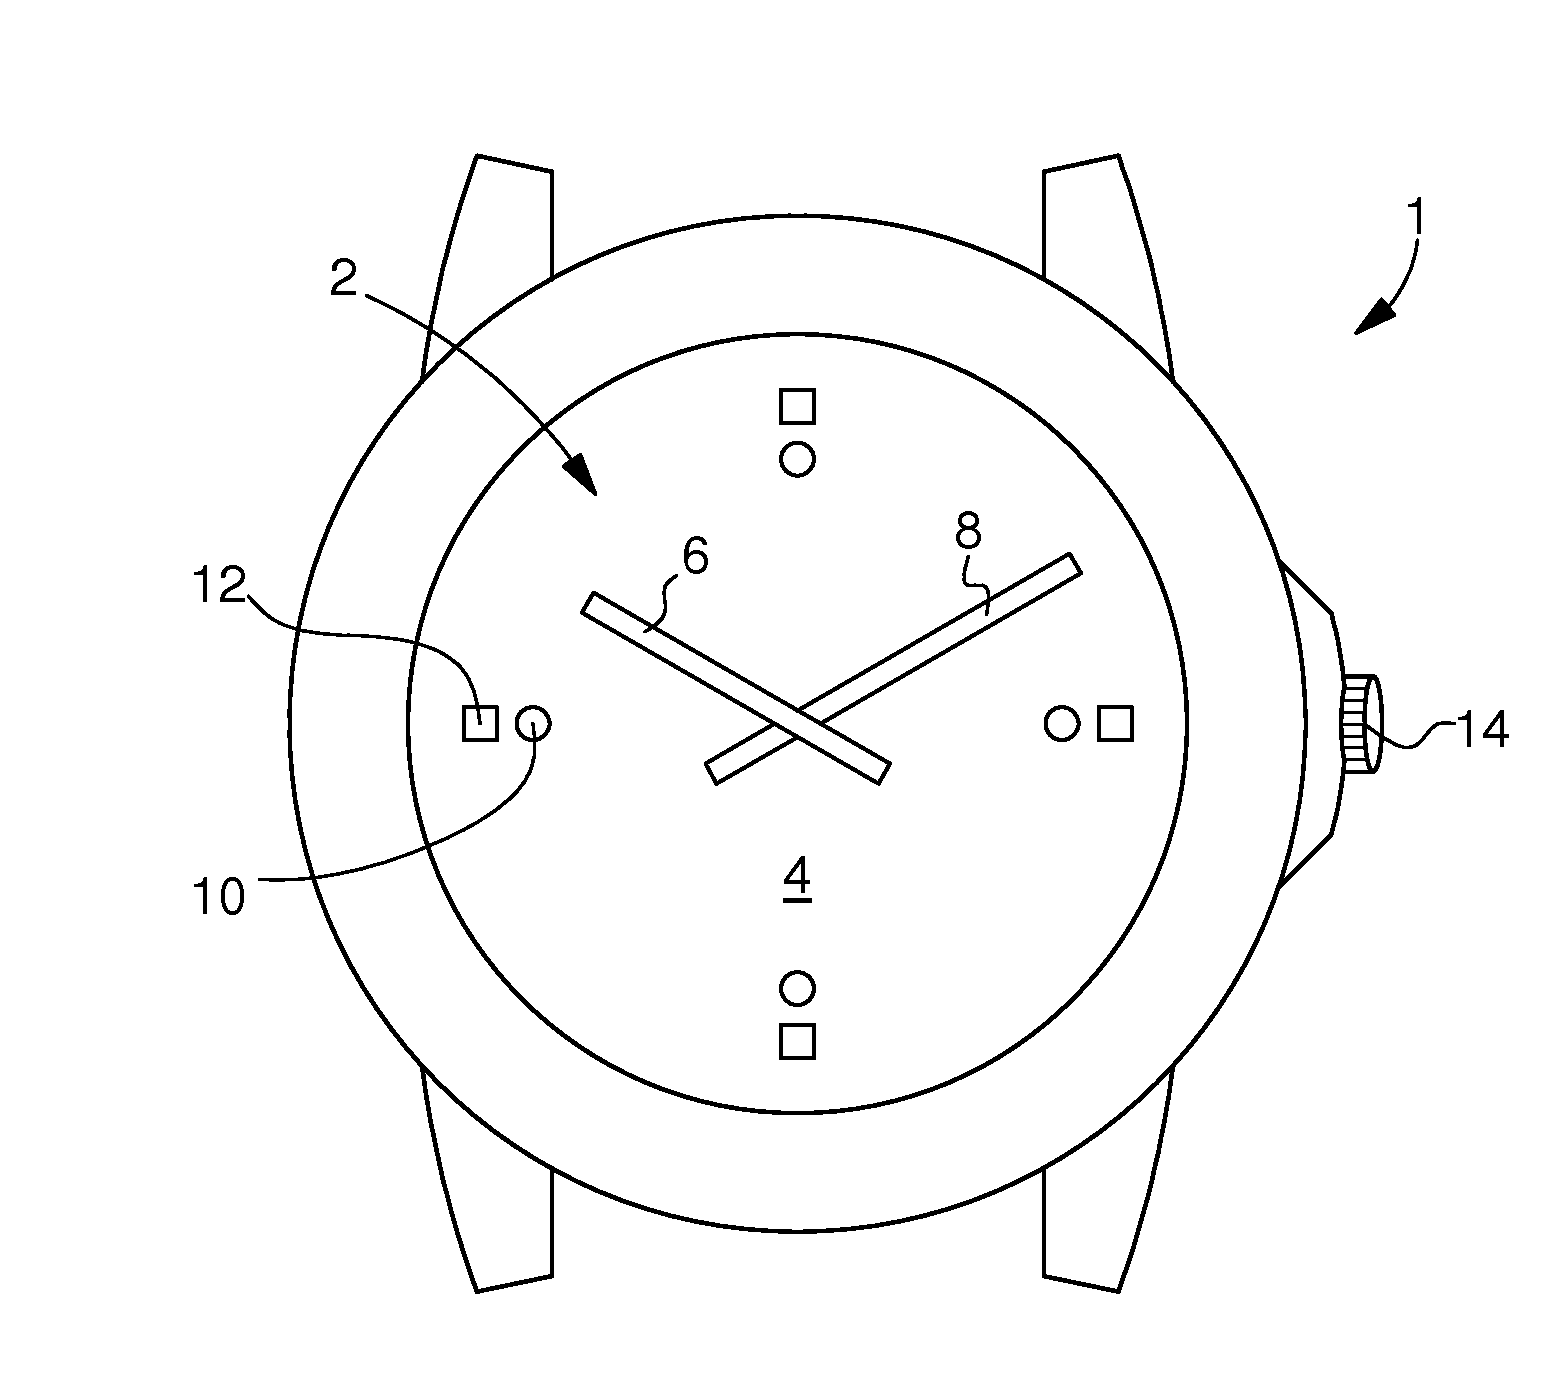 Wearable object such as a timepiece including means for triggering an electronic control function